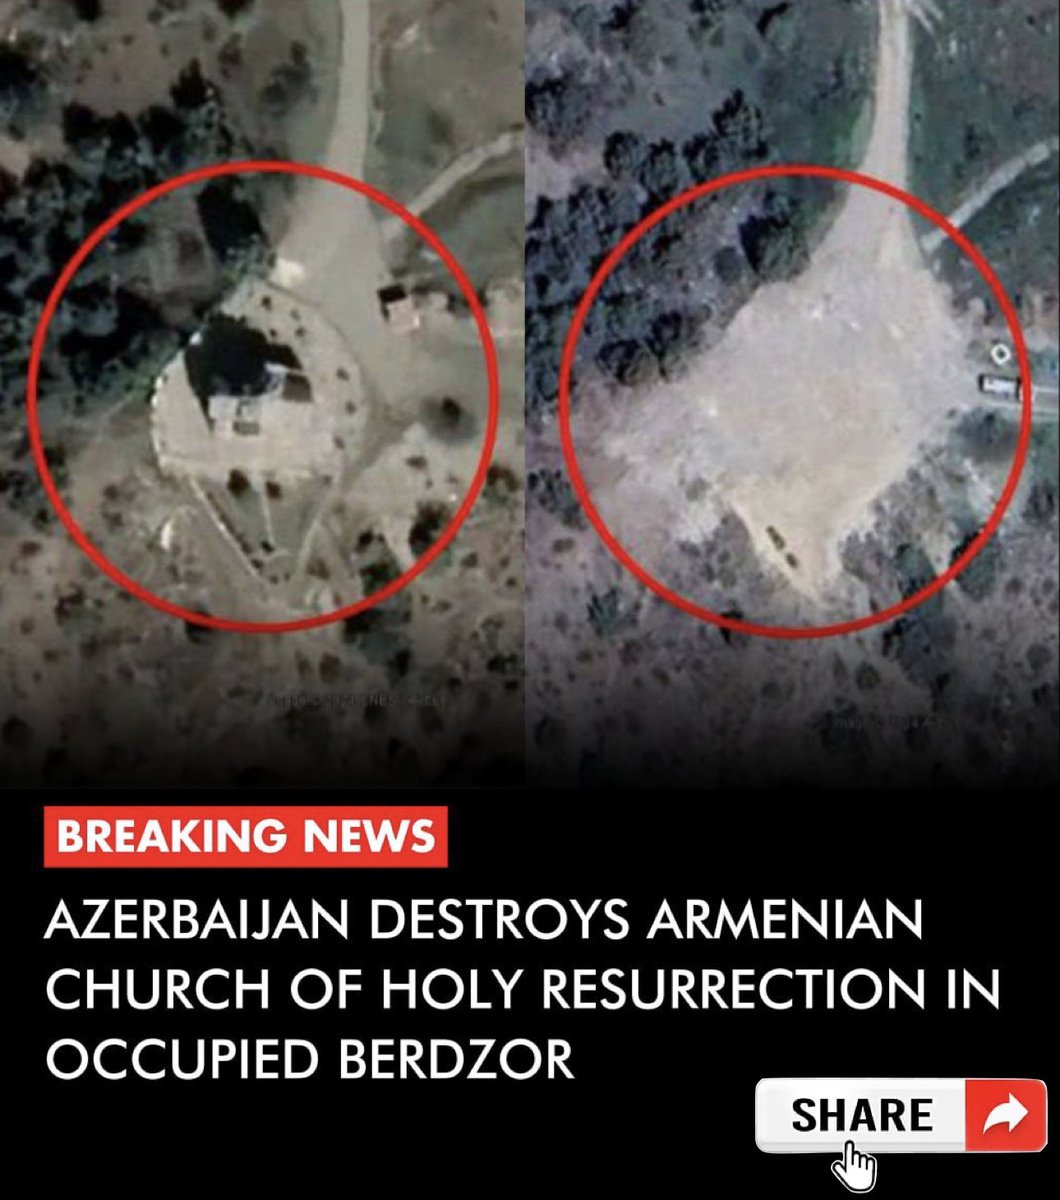 Azerbaijan has destroyed the Armenian Holy Resurrection Church of Berdzor in the occupied territory of Artsakh. Earlier in 2023, they ethnically cleansed over 120,000 Christians from Artsakh. This is not the first church demolished by Azerbaijan; most of the churches date back…